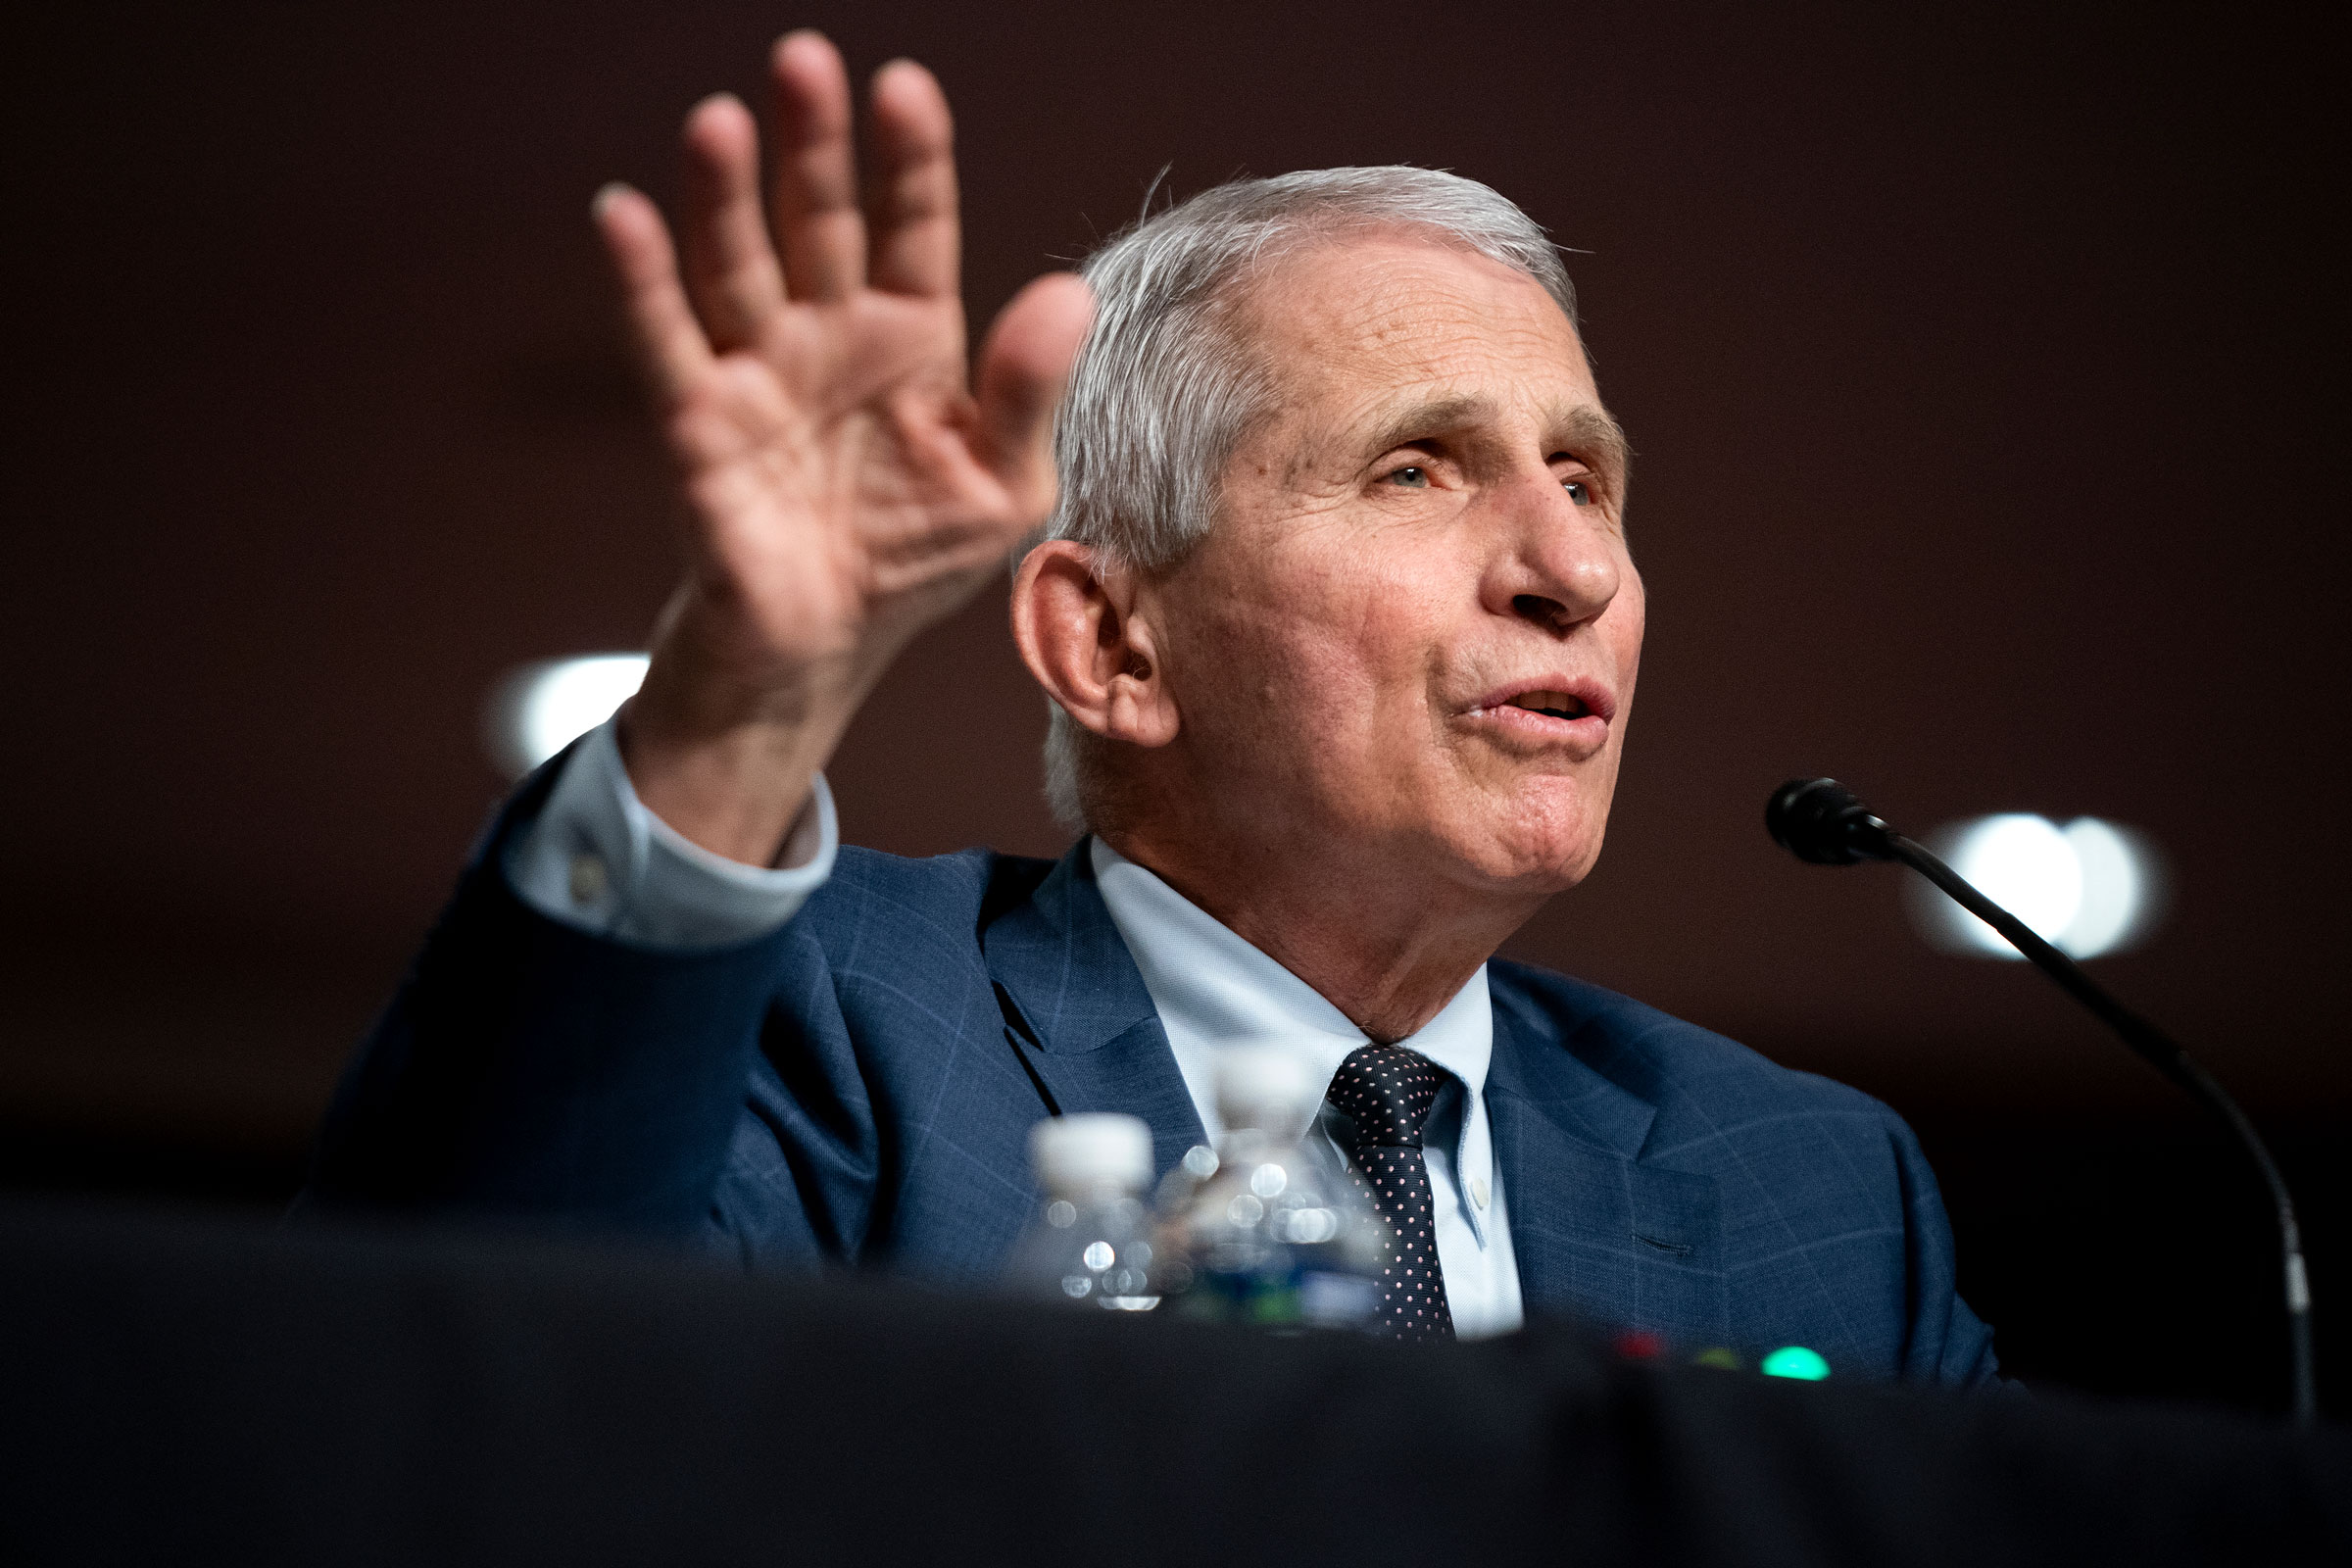 Anthony Fauci testifies at a Senate committee hearing